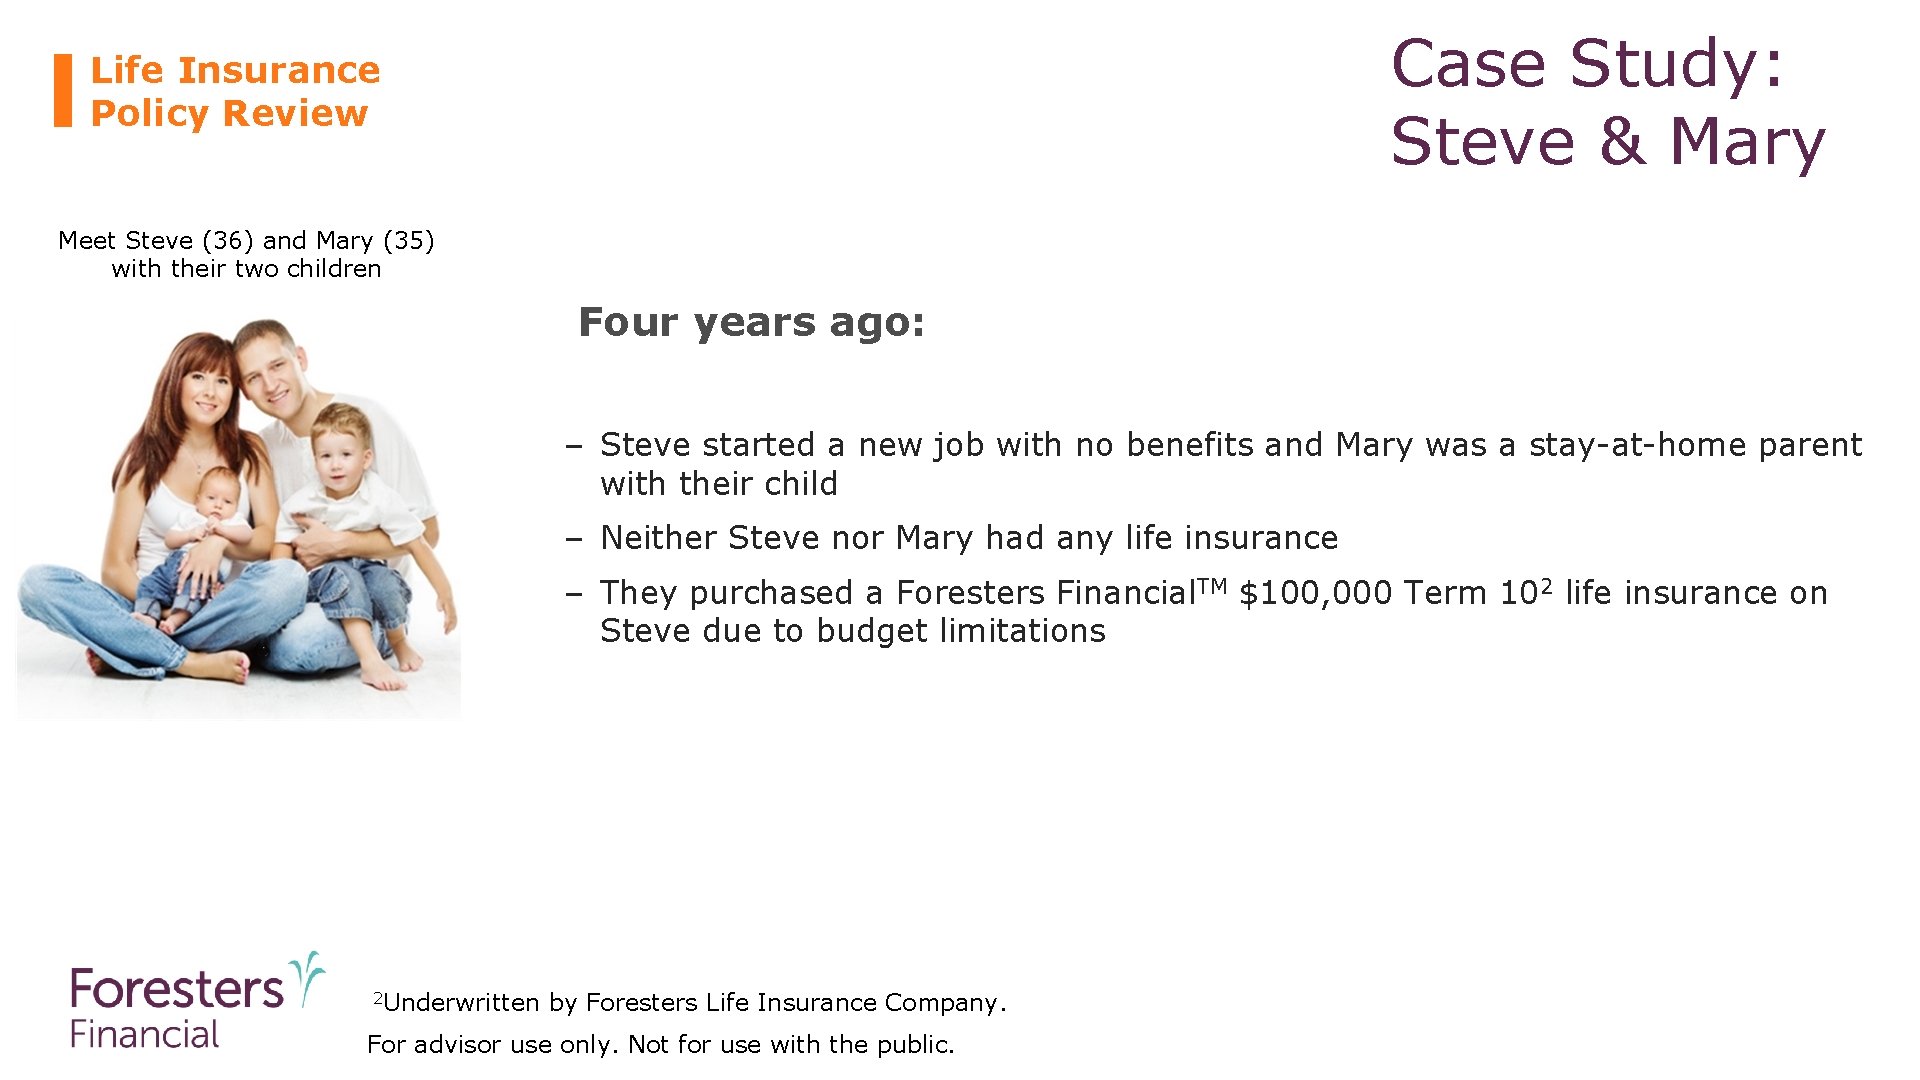 Case Study: Steve & Mary Life Insurance Policy Review Meet Steve (36) and Mary